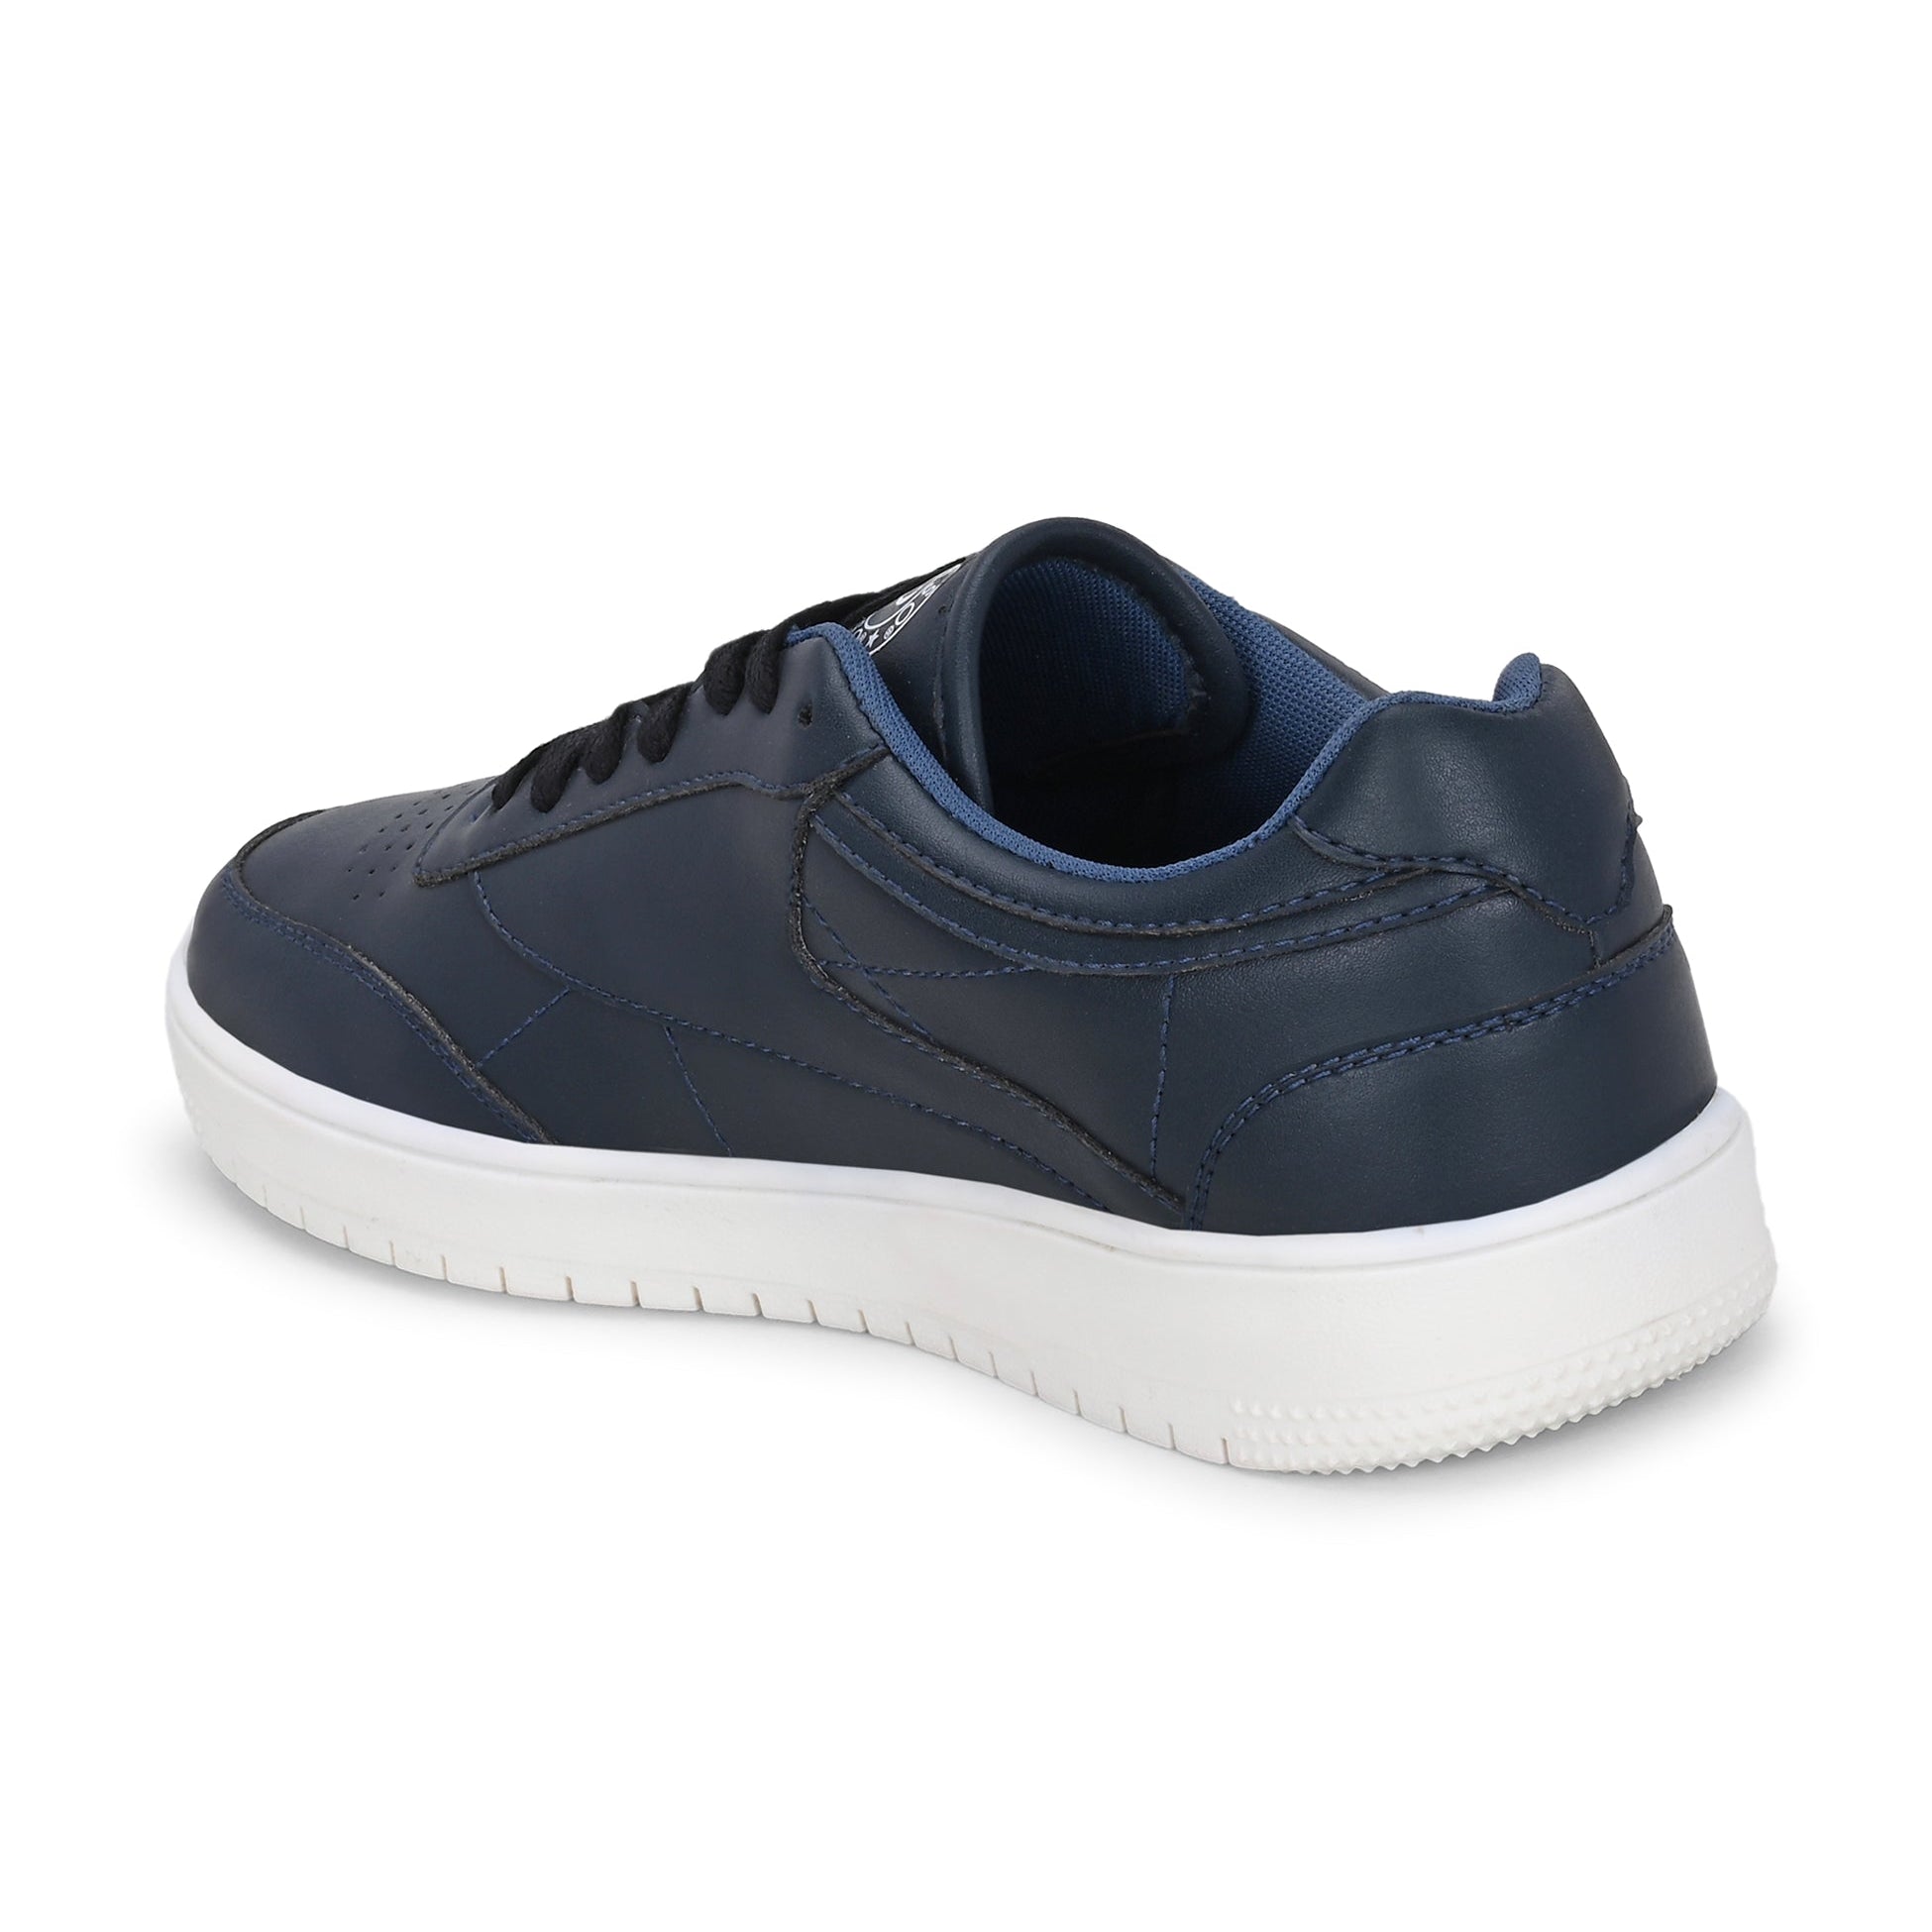 Navy Blue colour Men's casual lace-up sneakers with navy blue laces.